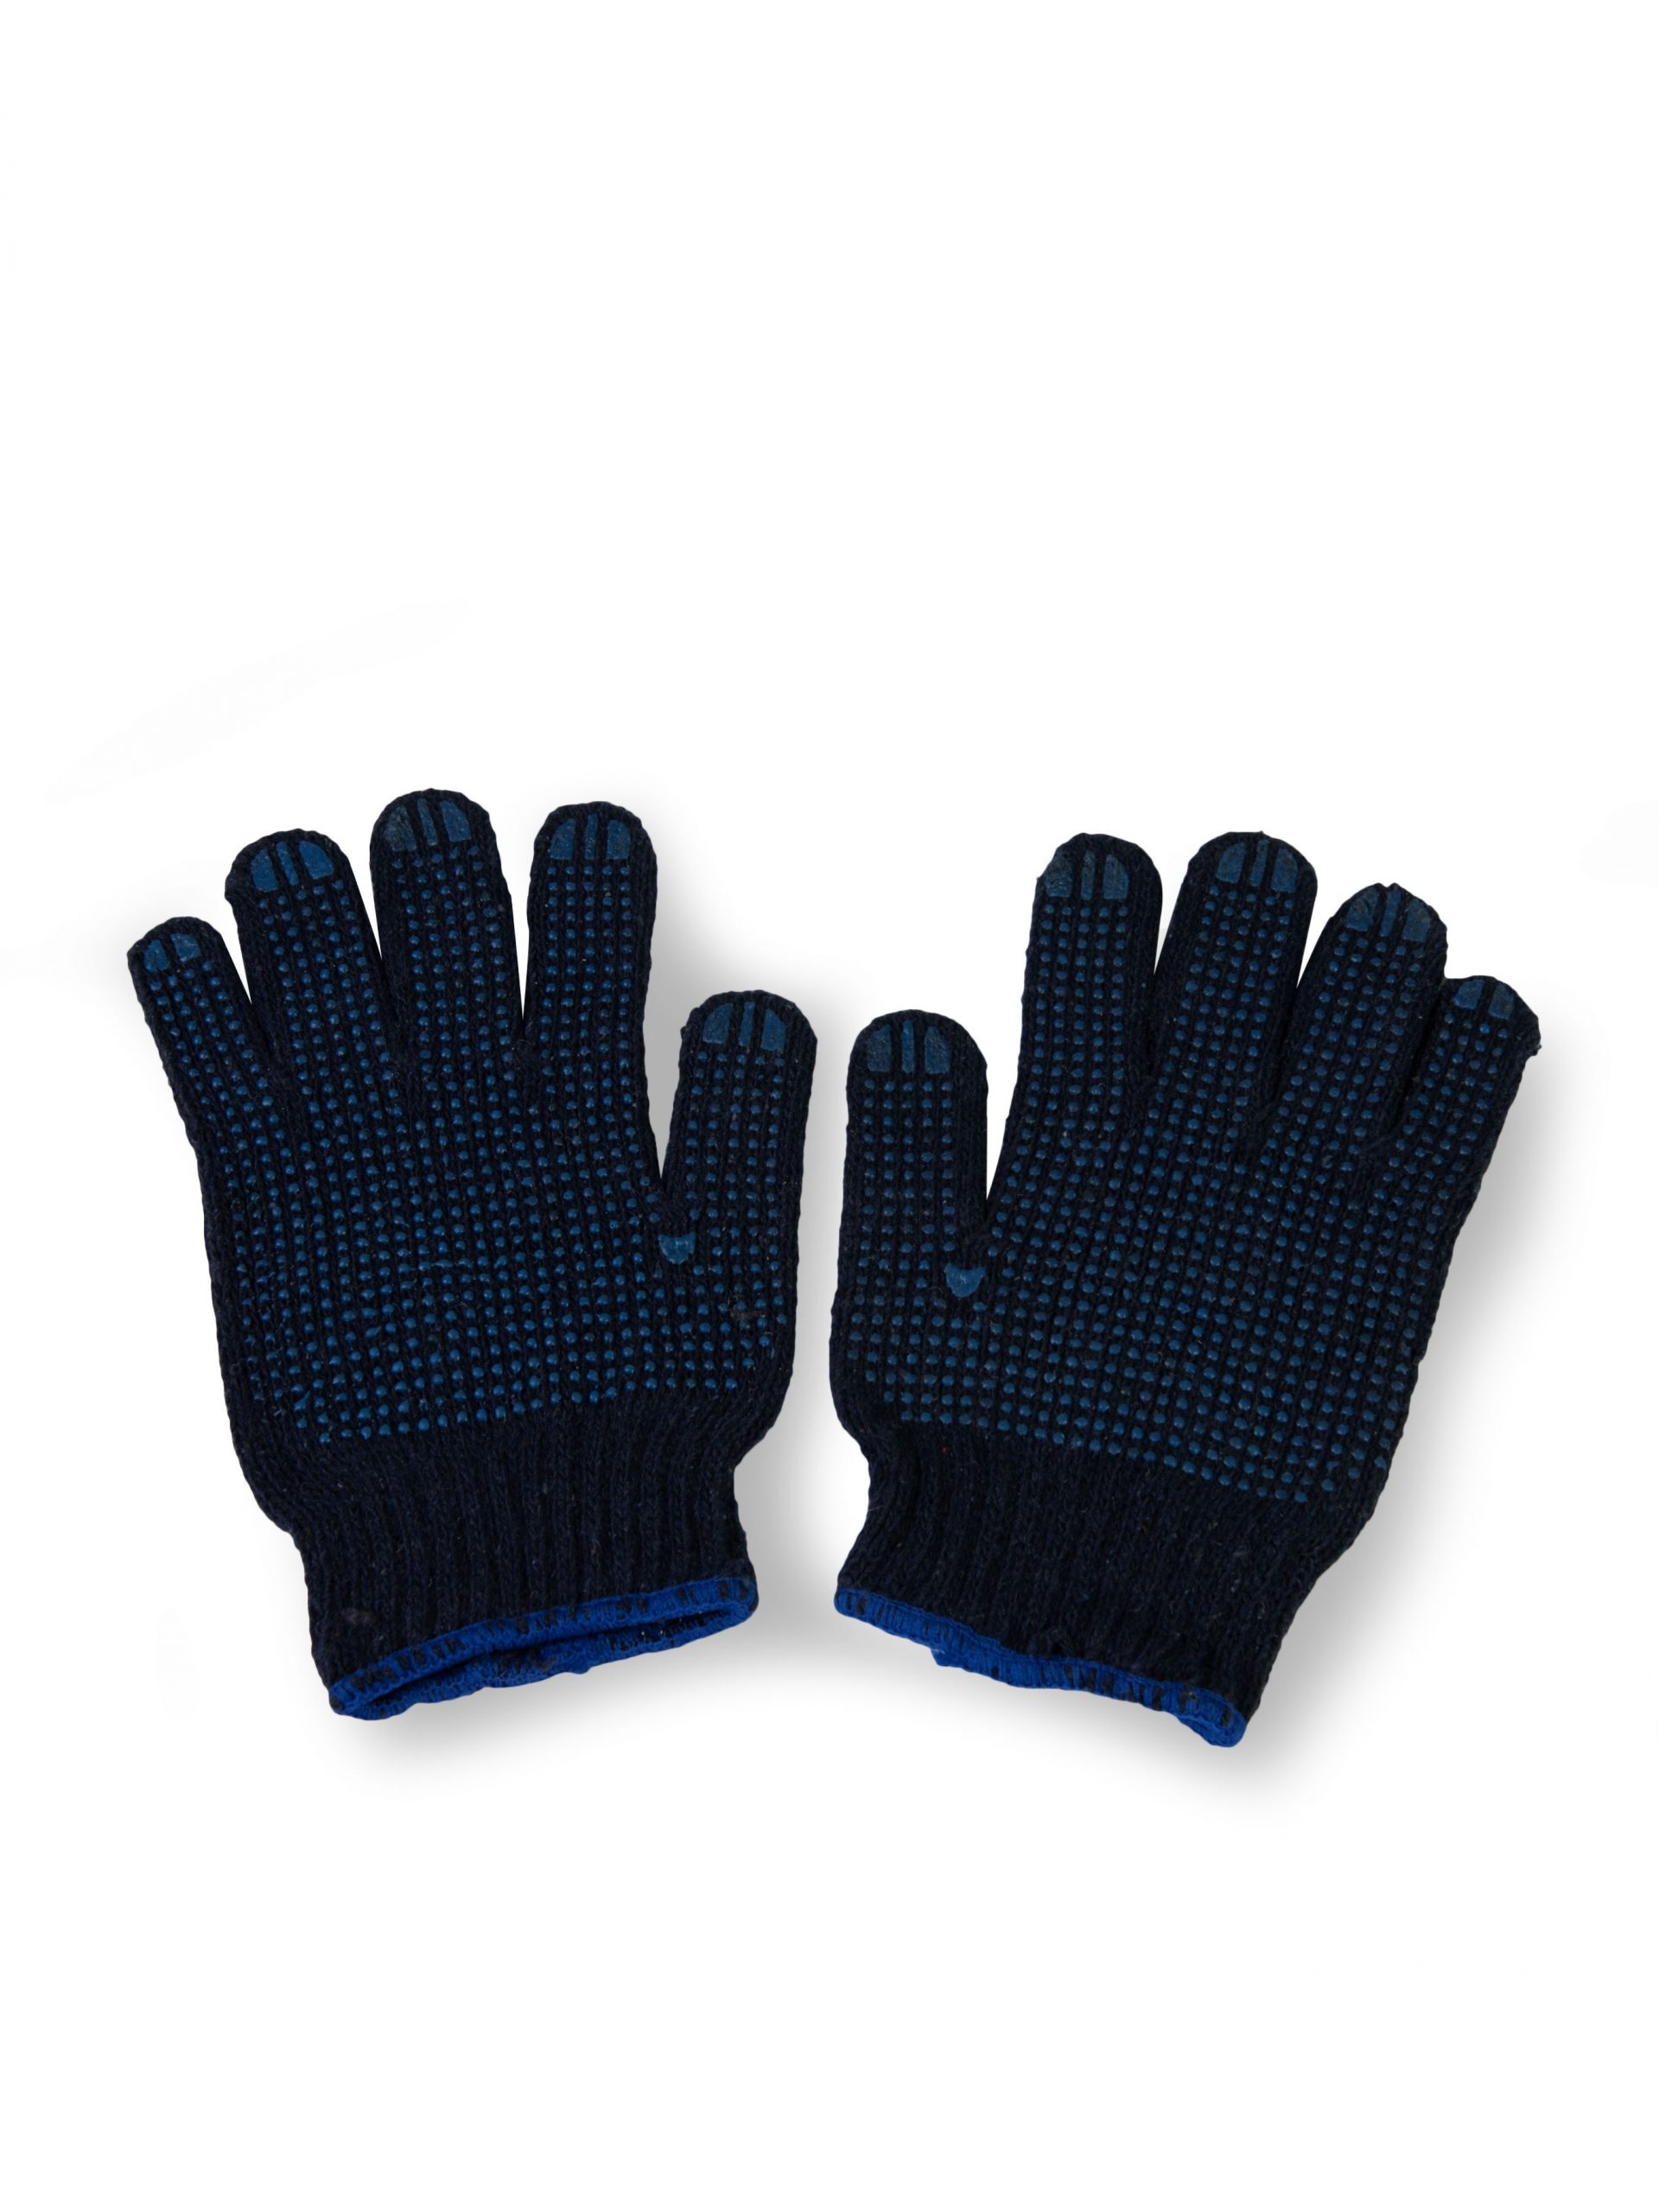 COTTON DOUBLE DOTTED HAND GLOVES BLUE COLOR